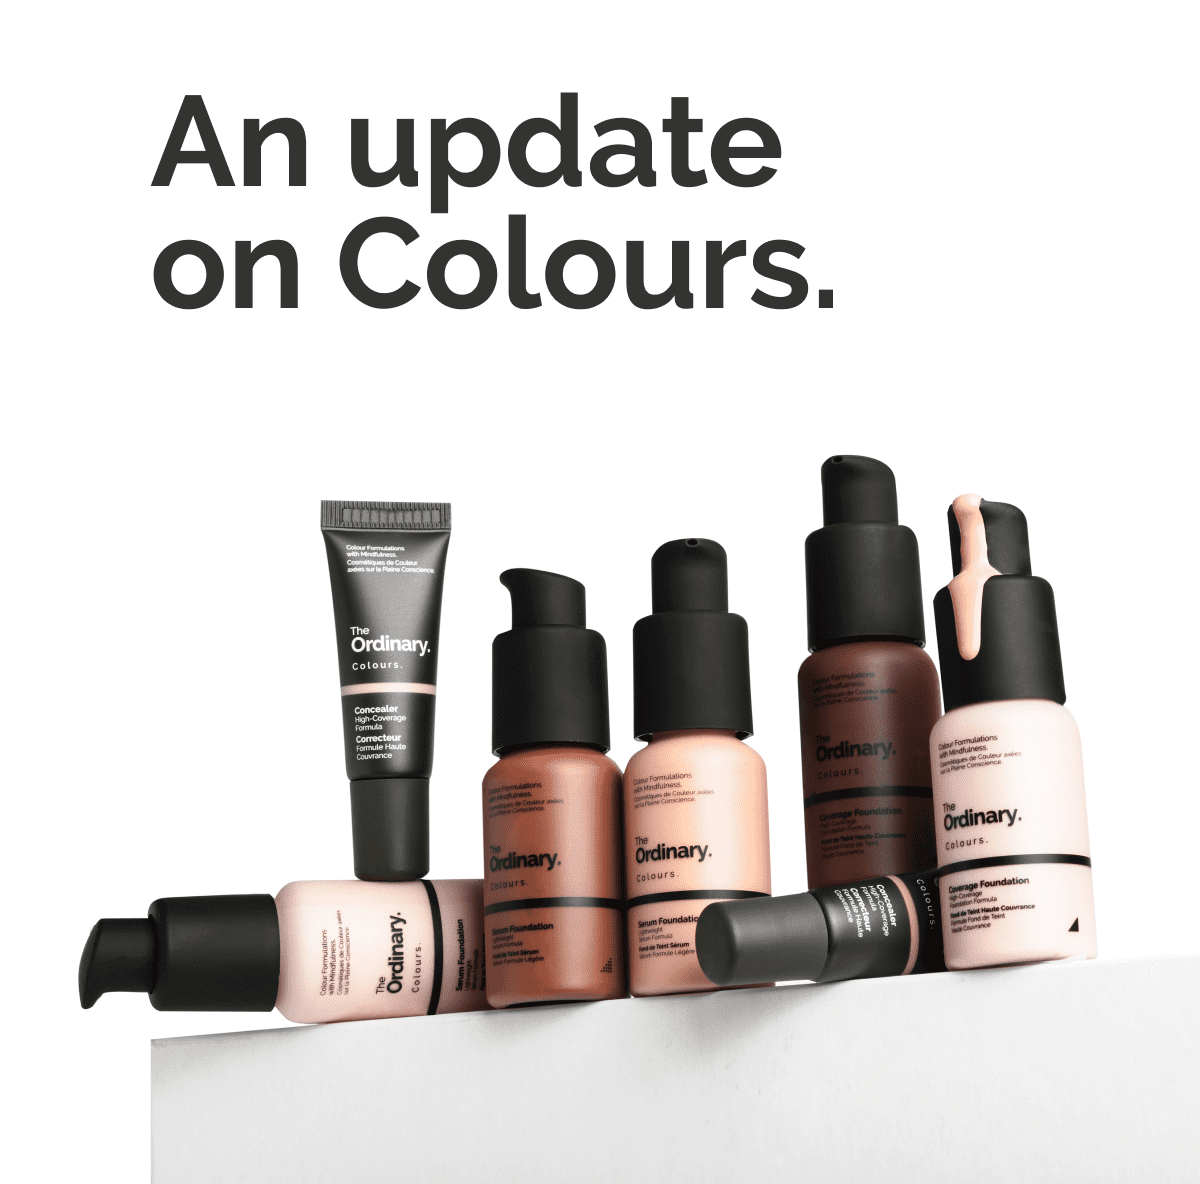 are the ordinary foundations and concealer being discontinued